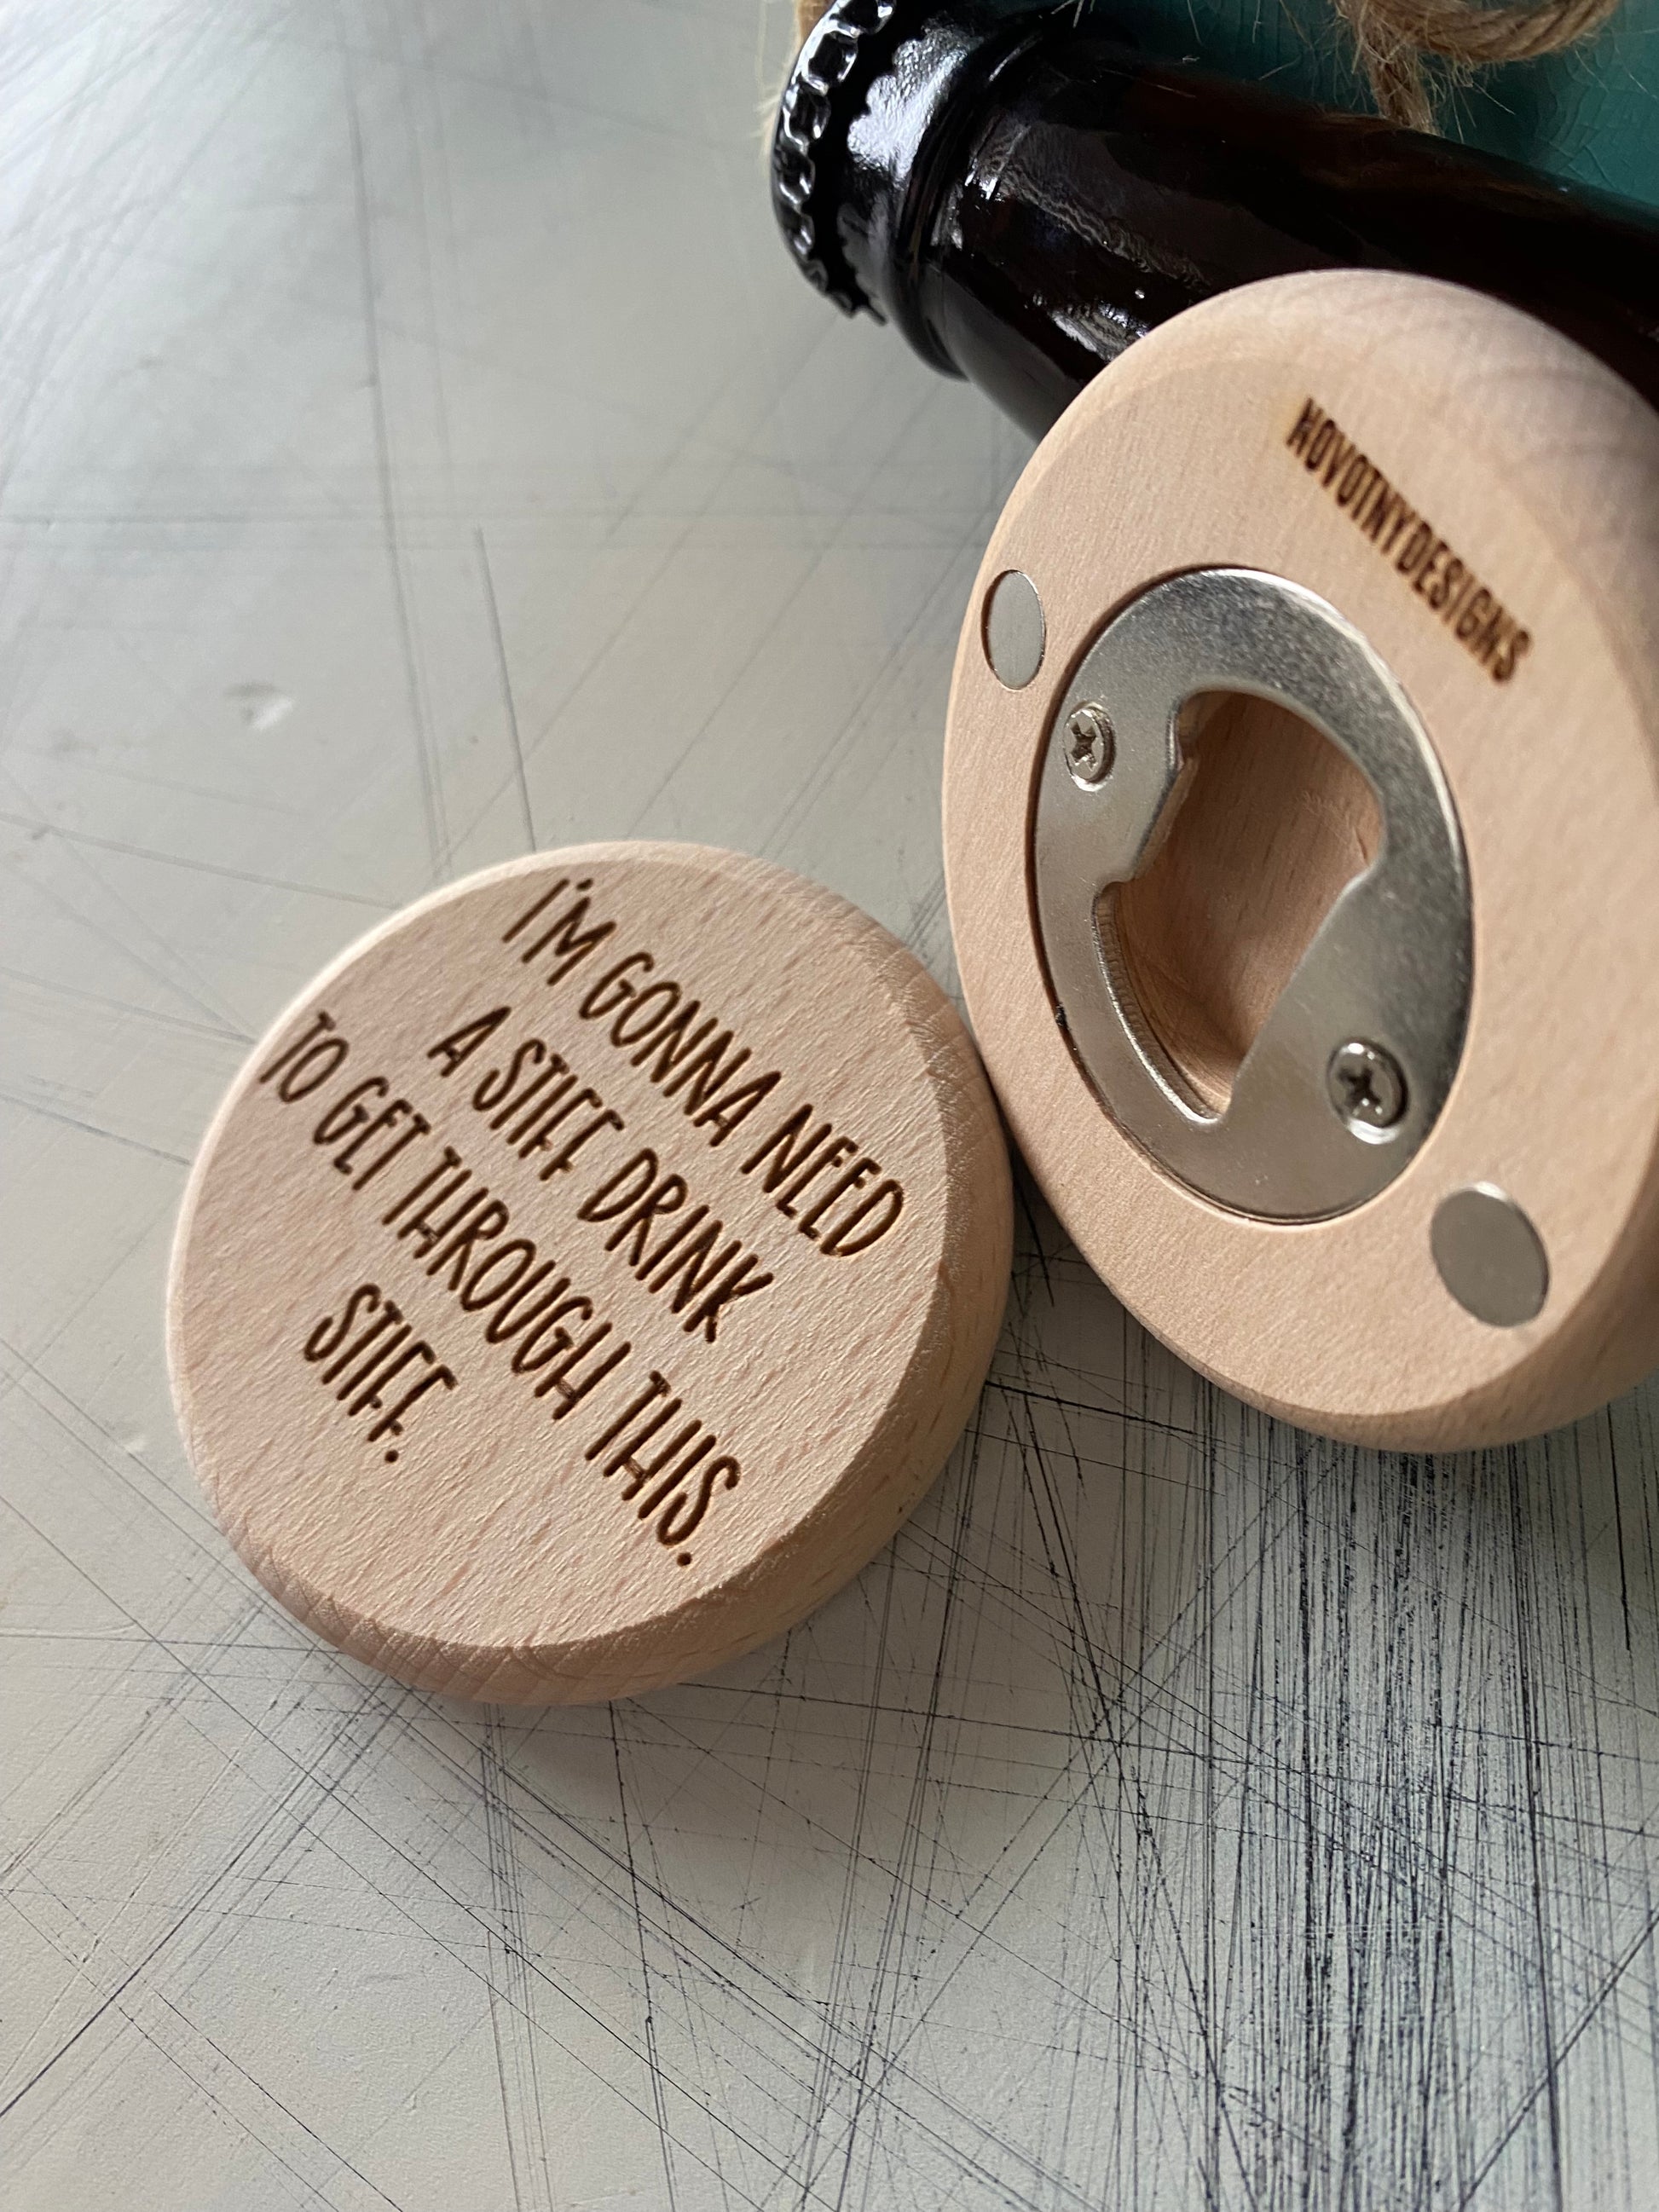 I'm gonna need a stiff drink to get through this. Stiff. - Novotny Designs - engraved magnetic wood bottle opener